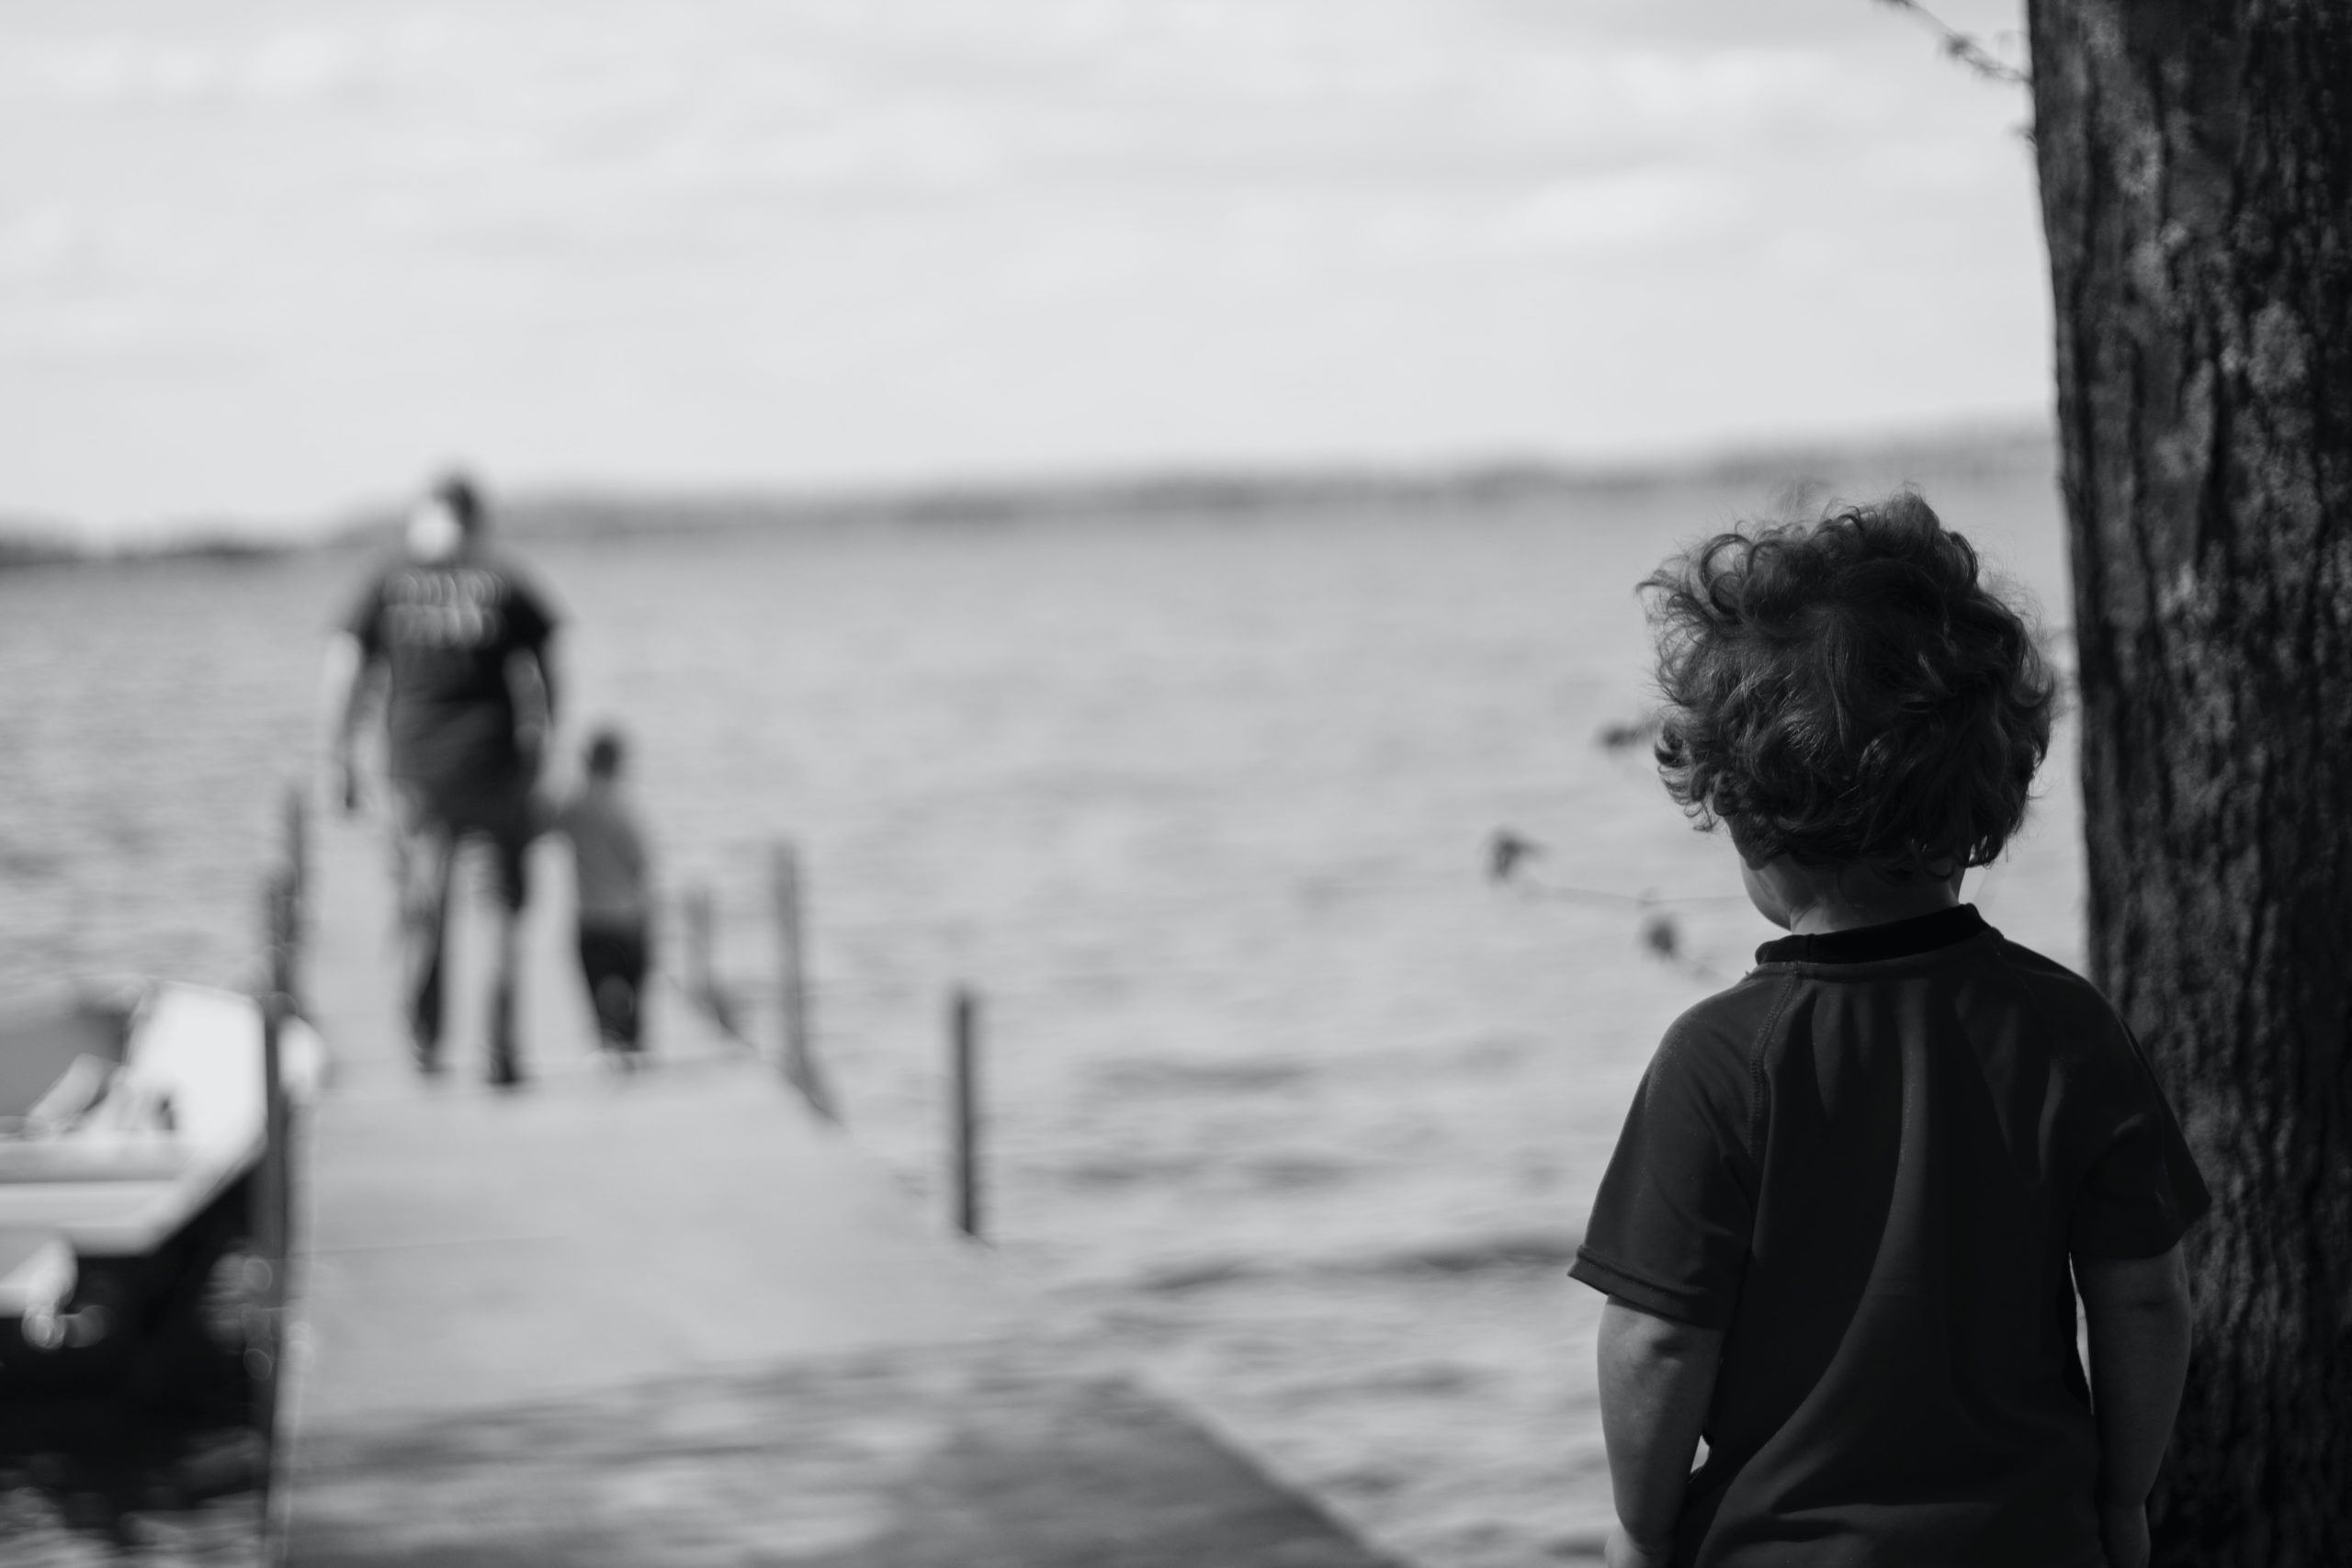 Child looking at adult and child on dock over lake